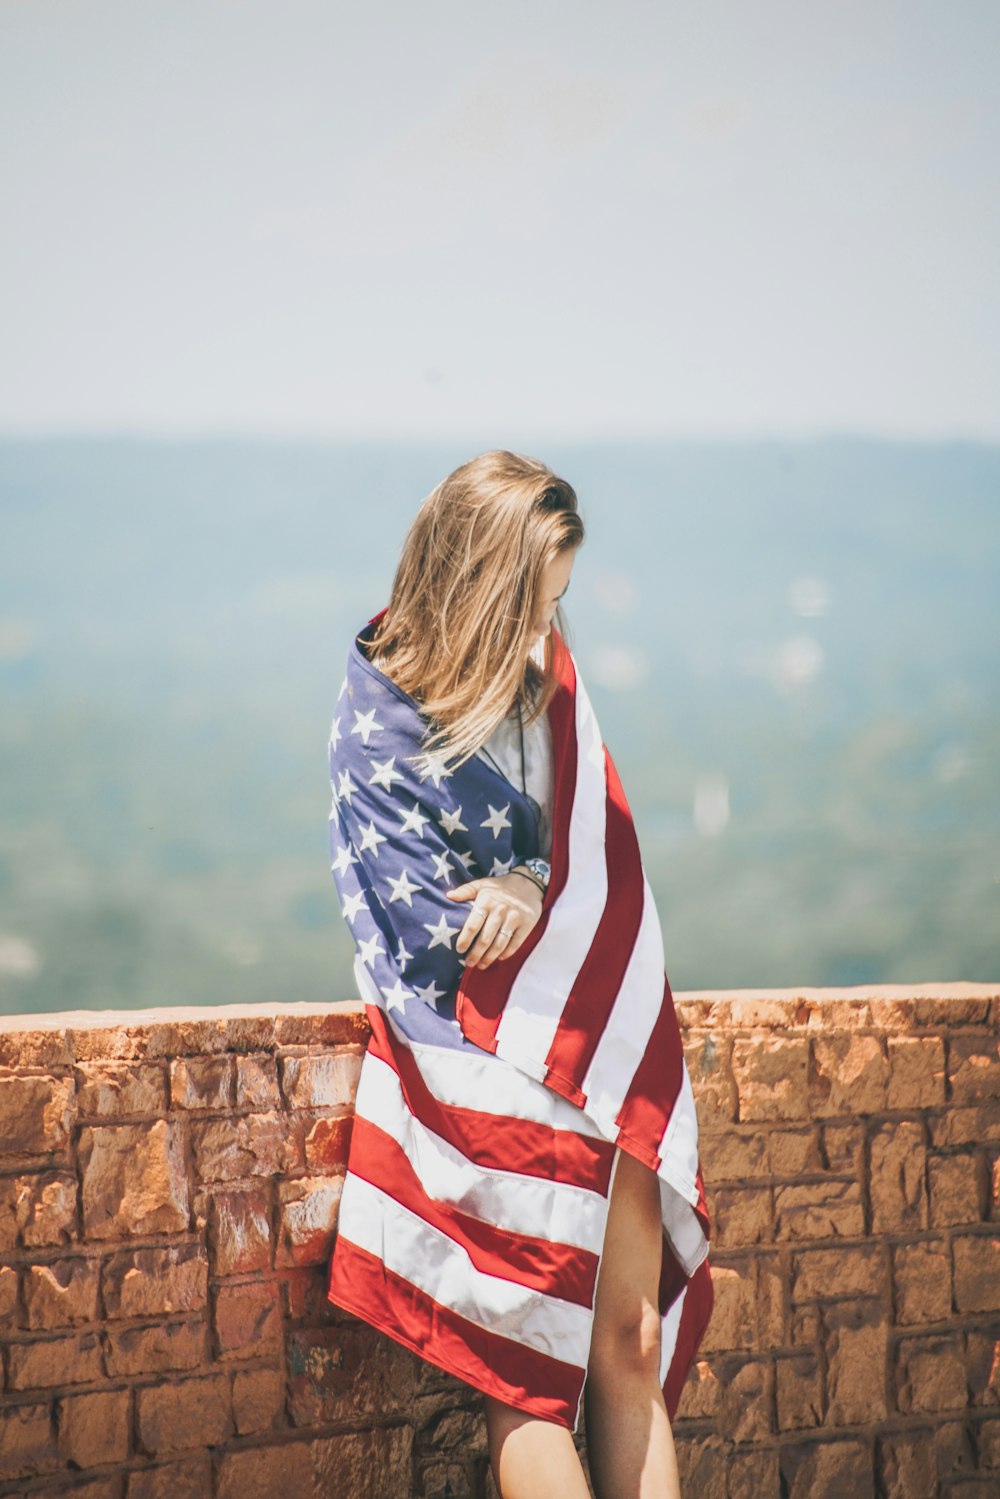 woman standing leaning on brick wall wrapping body with U.S. flag near body of water